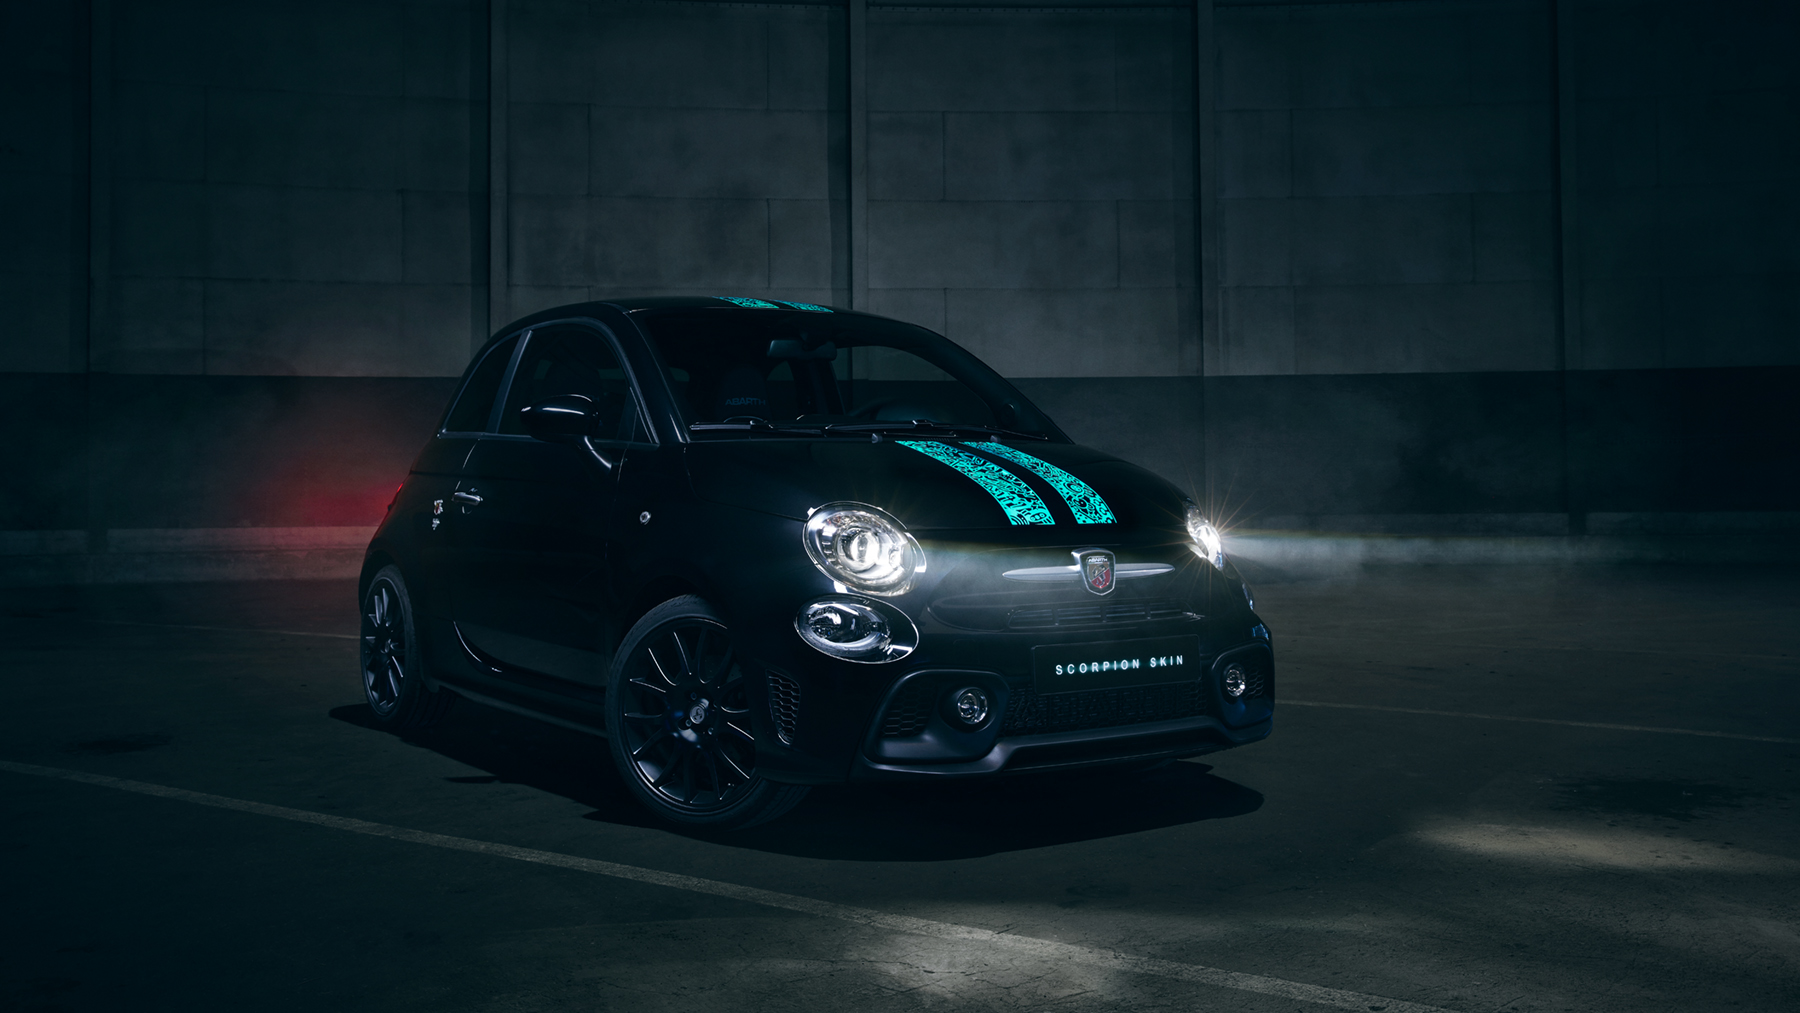 abarth shows one of a kind fiat 500 with scorpion skin paint 2018 06 abarth7518 5 1l srgb 180xx1013px